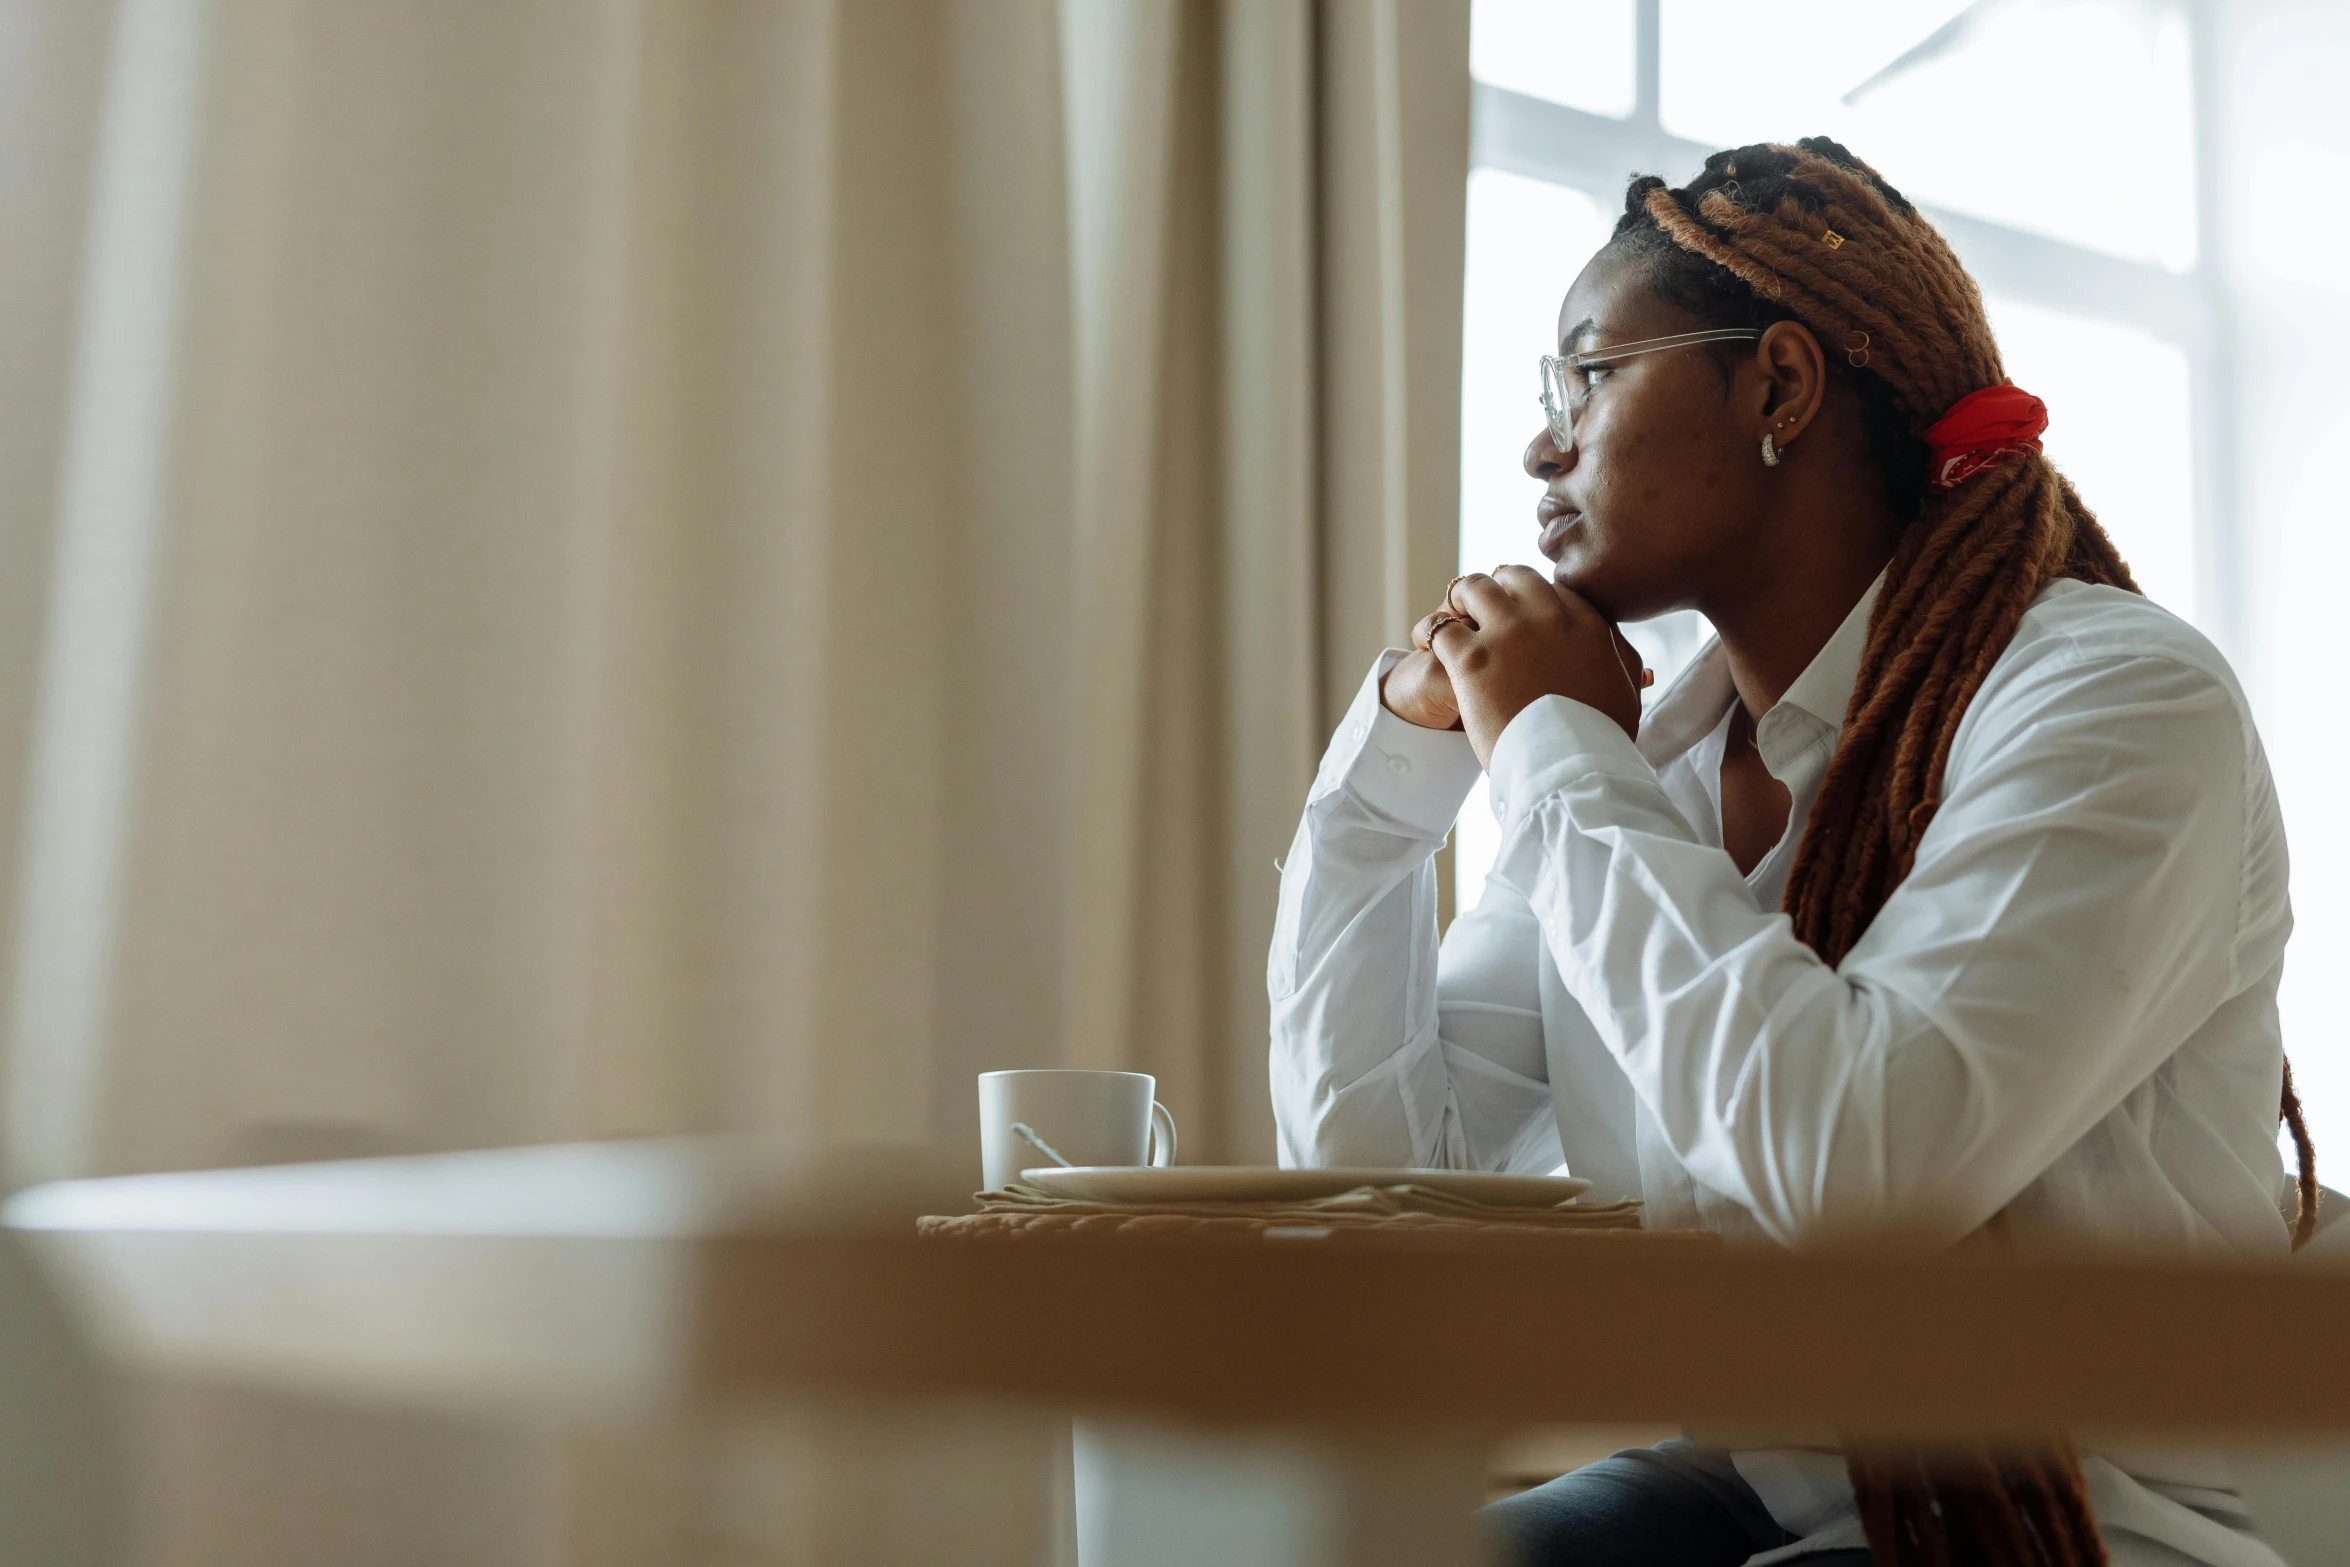 a woman sitting at a table with a cup of coffee, looking out a window, with brown skin, praying, profile image